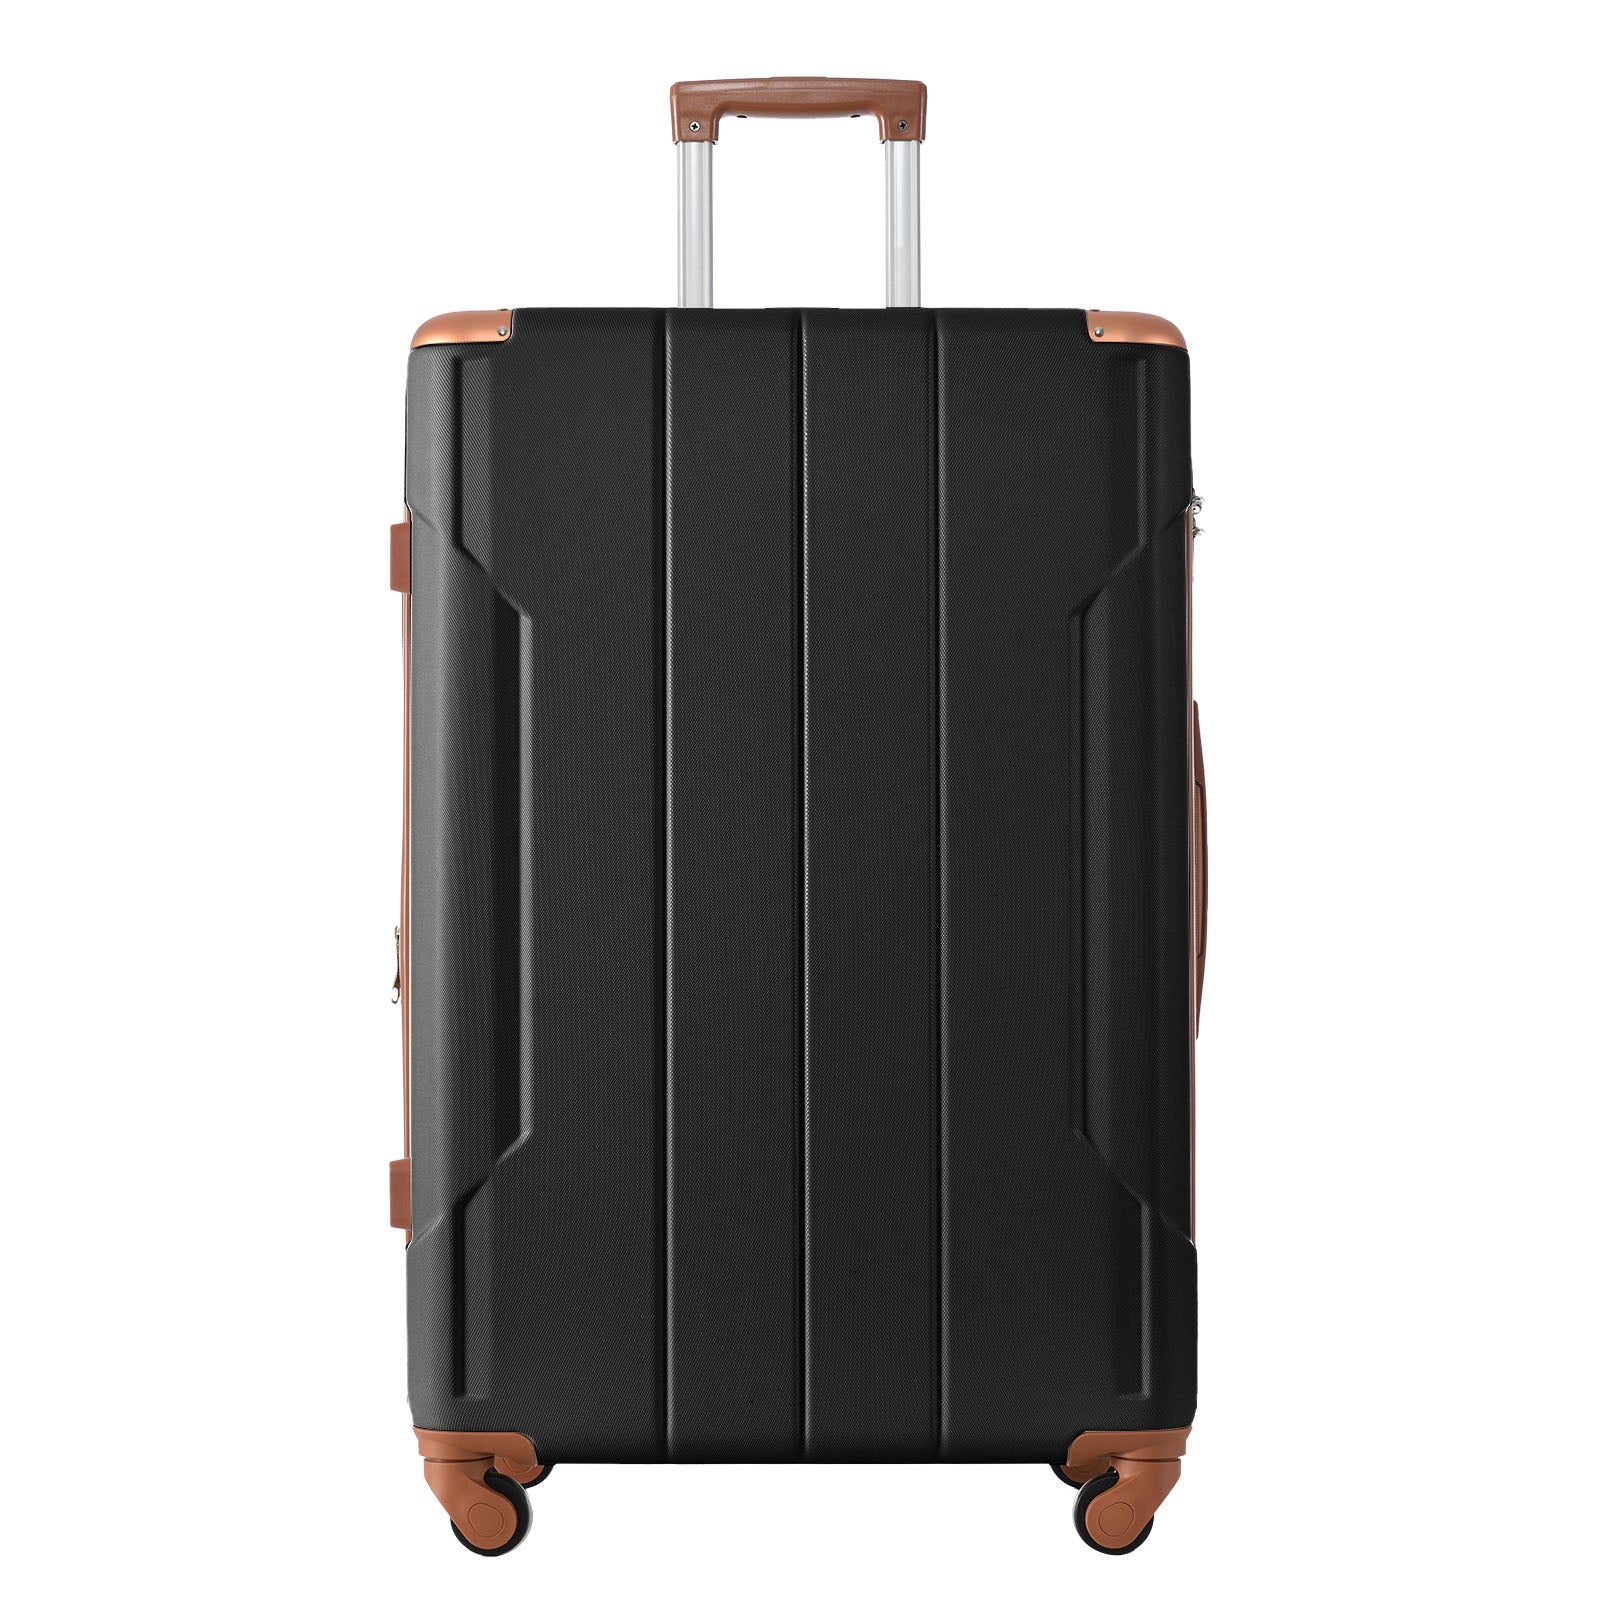 Hardshell Luggage Spinner Suitcase with TSA Lock black brown-abs